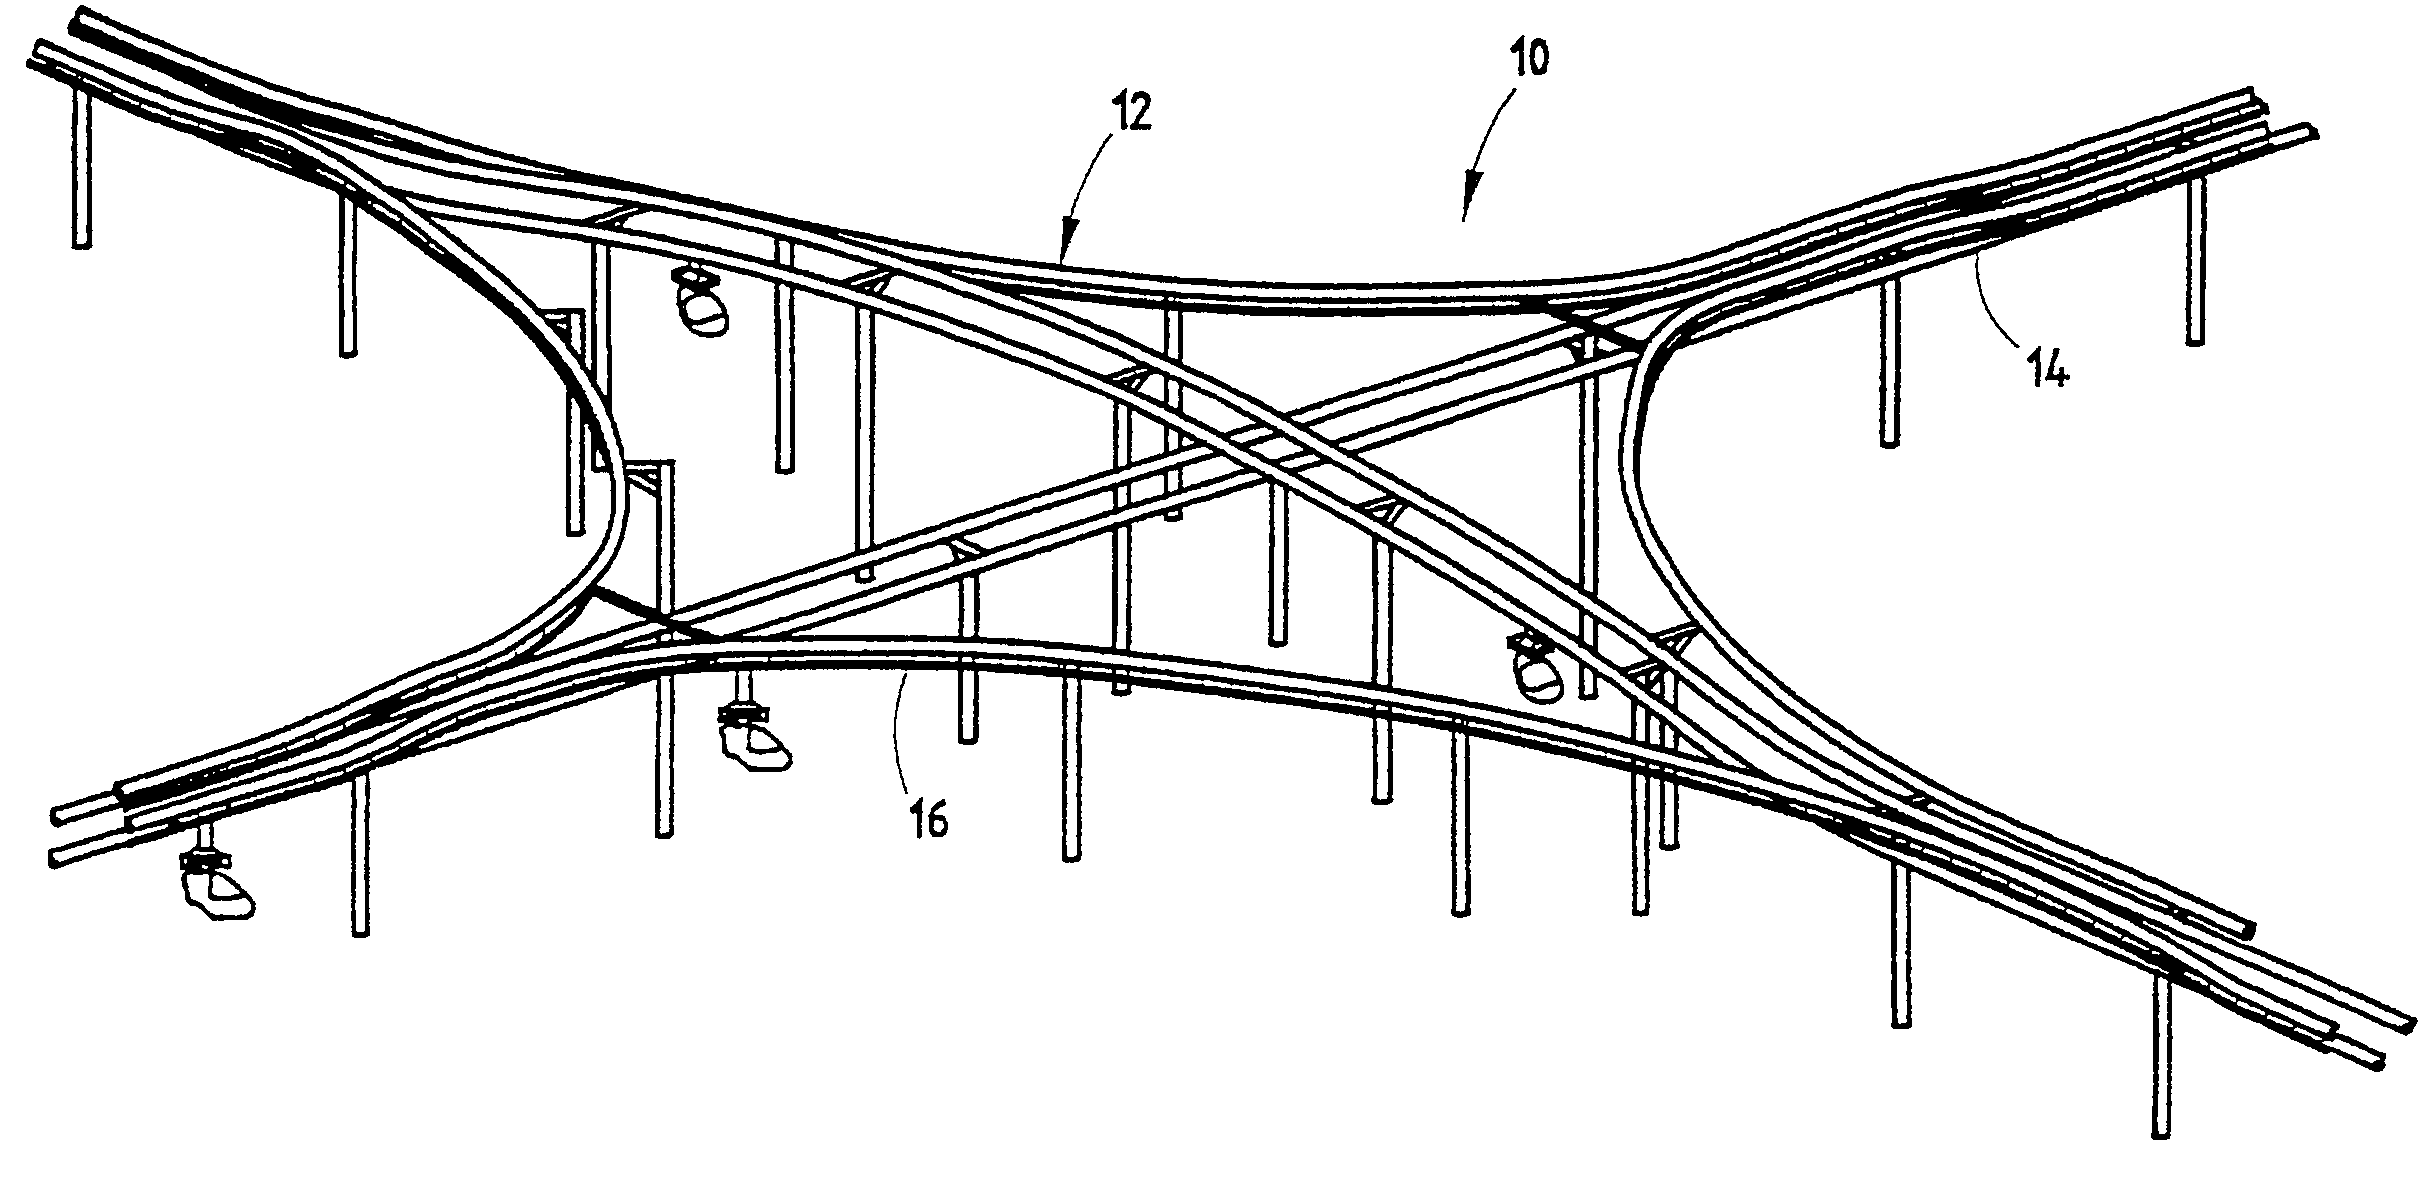 Individual transport control and communication system